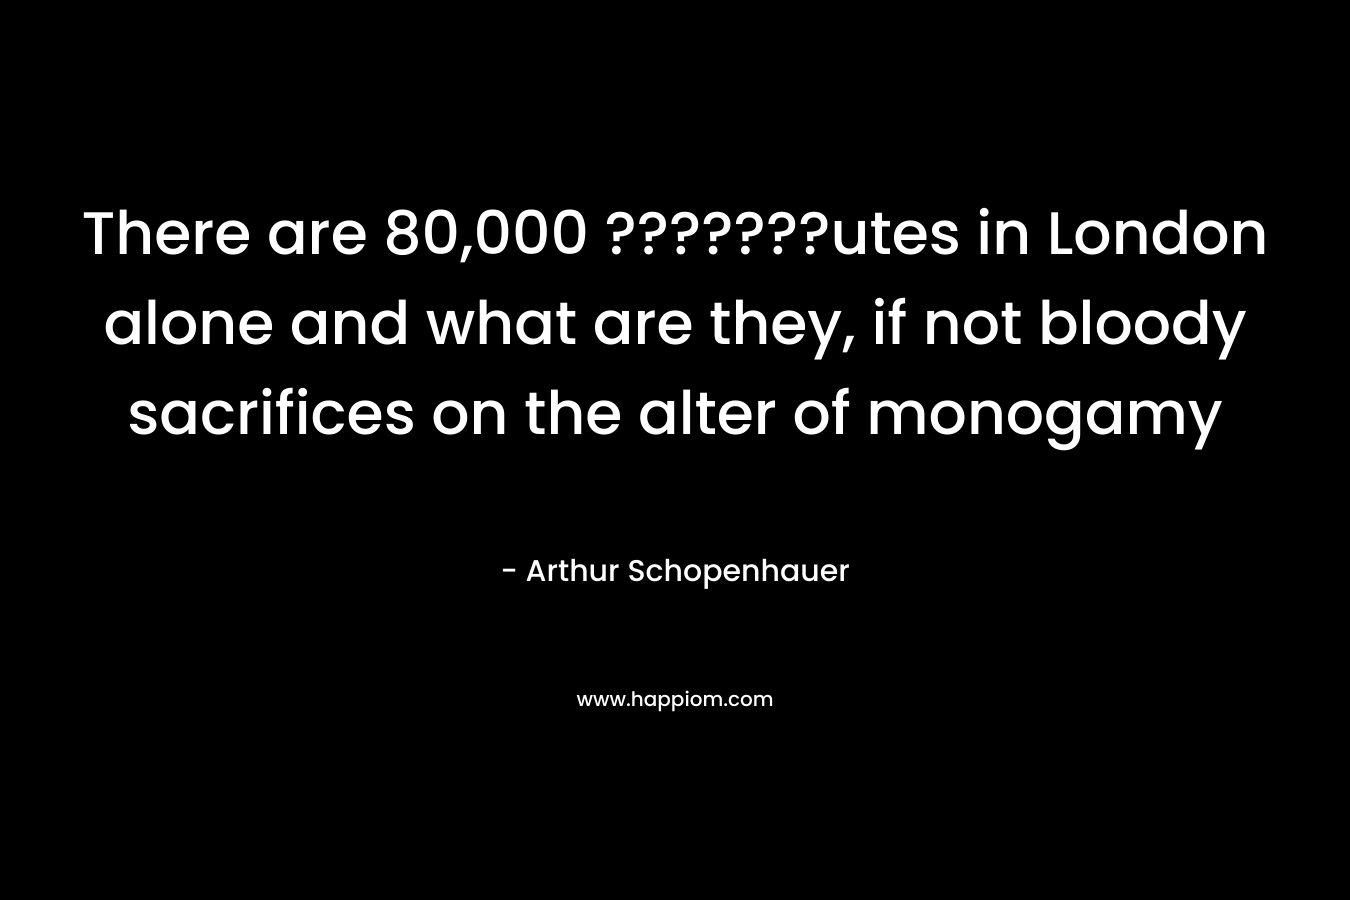 There are 80,000 ???????utes in London alone and what are they, if not bloody sacrifices on the alter of monogamy – Arthur Schopenhauer